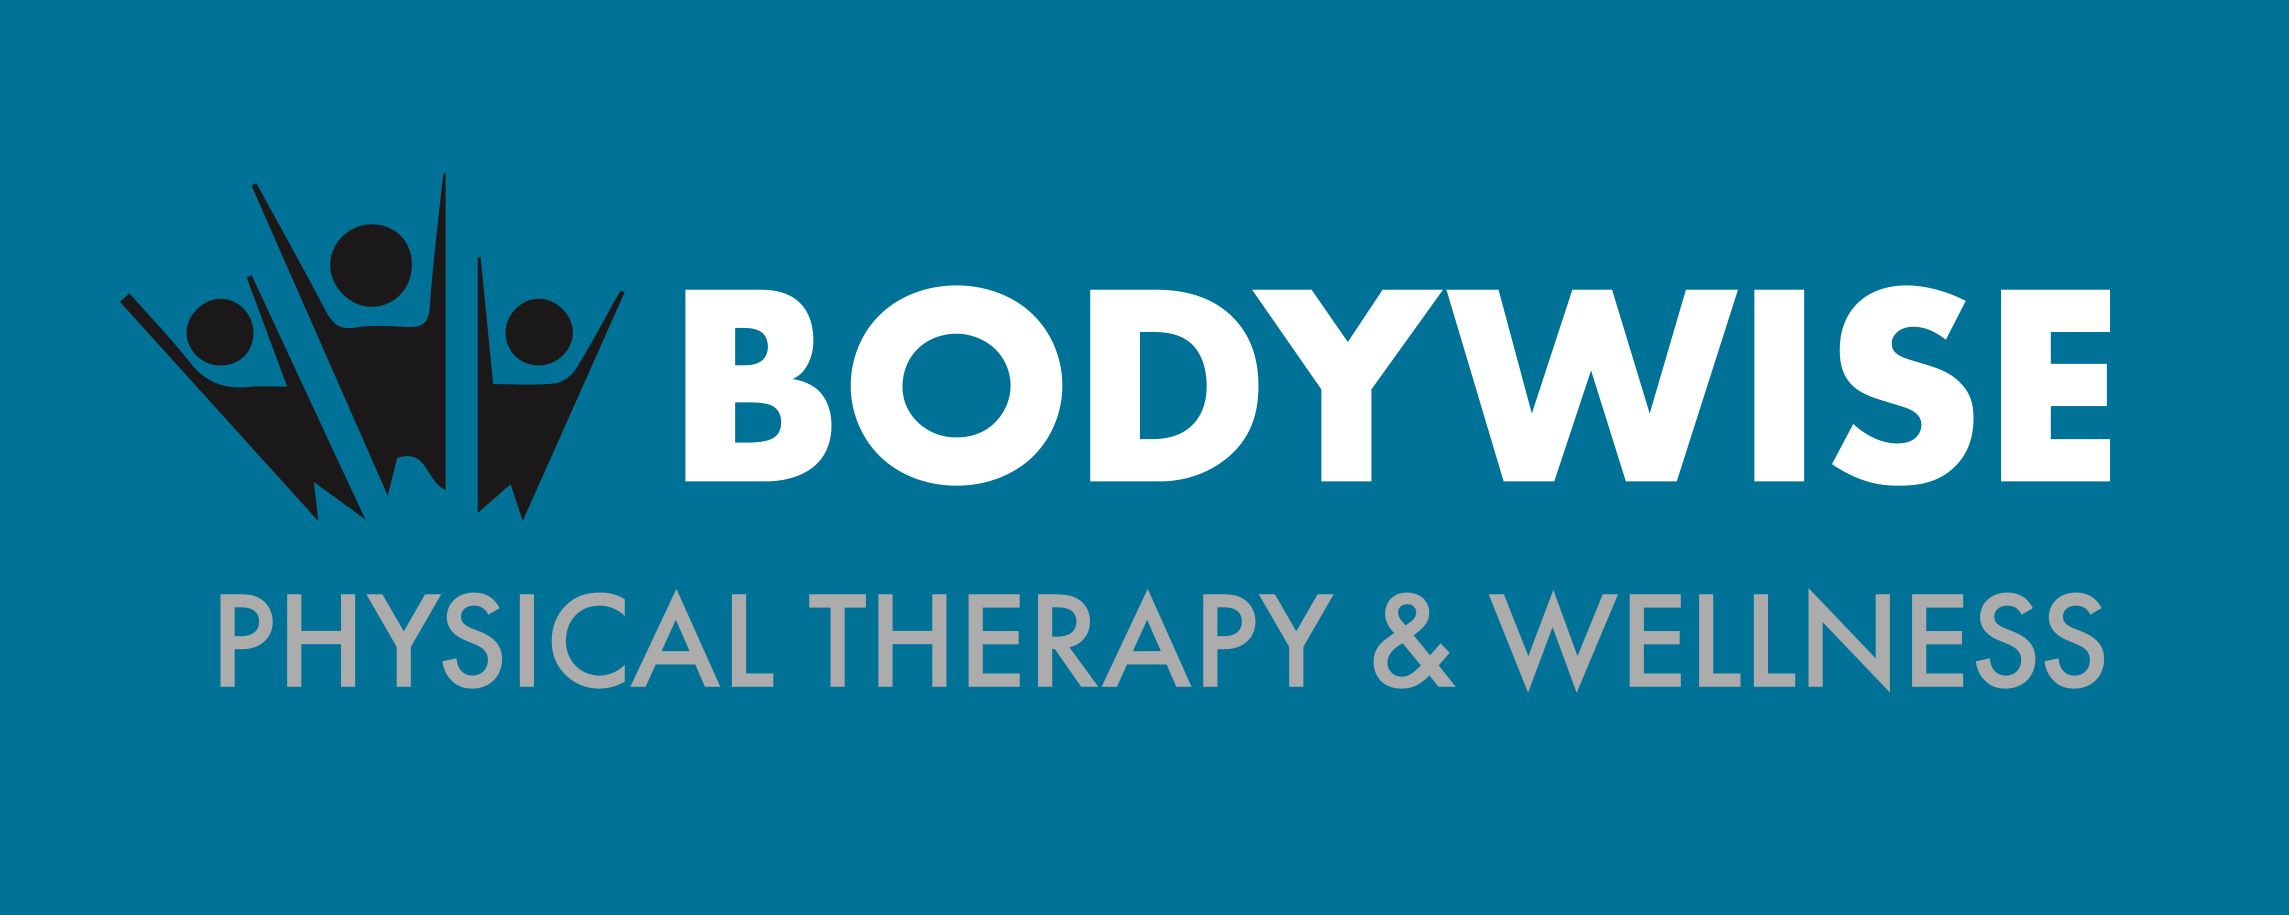 Bodywise Physical Therapy & Wellness